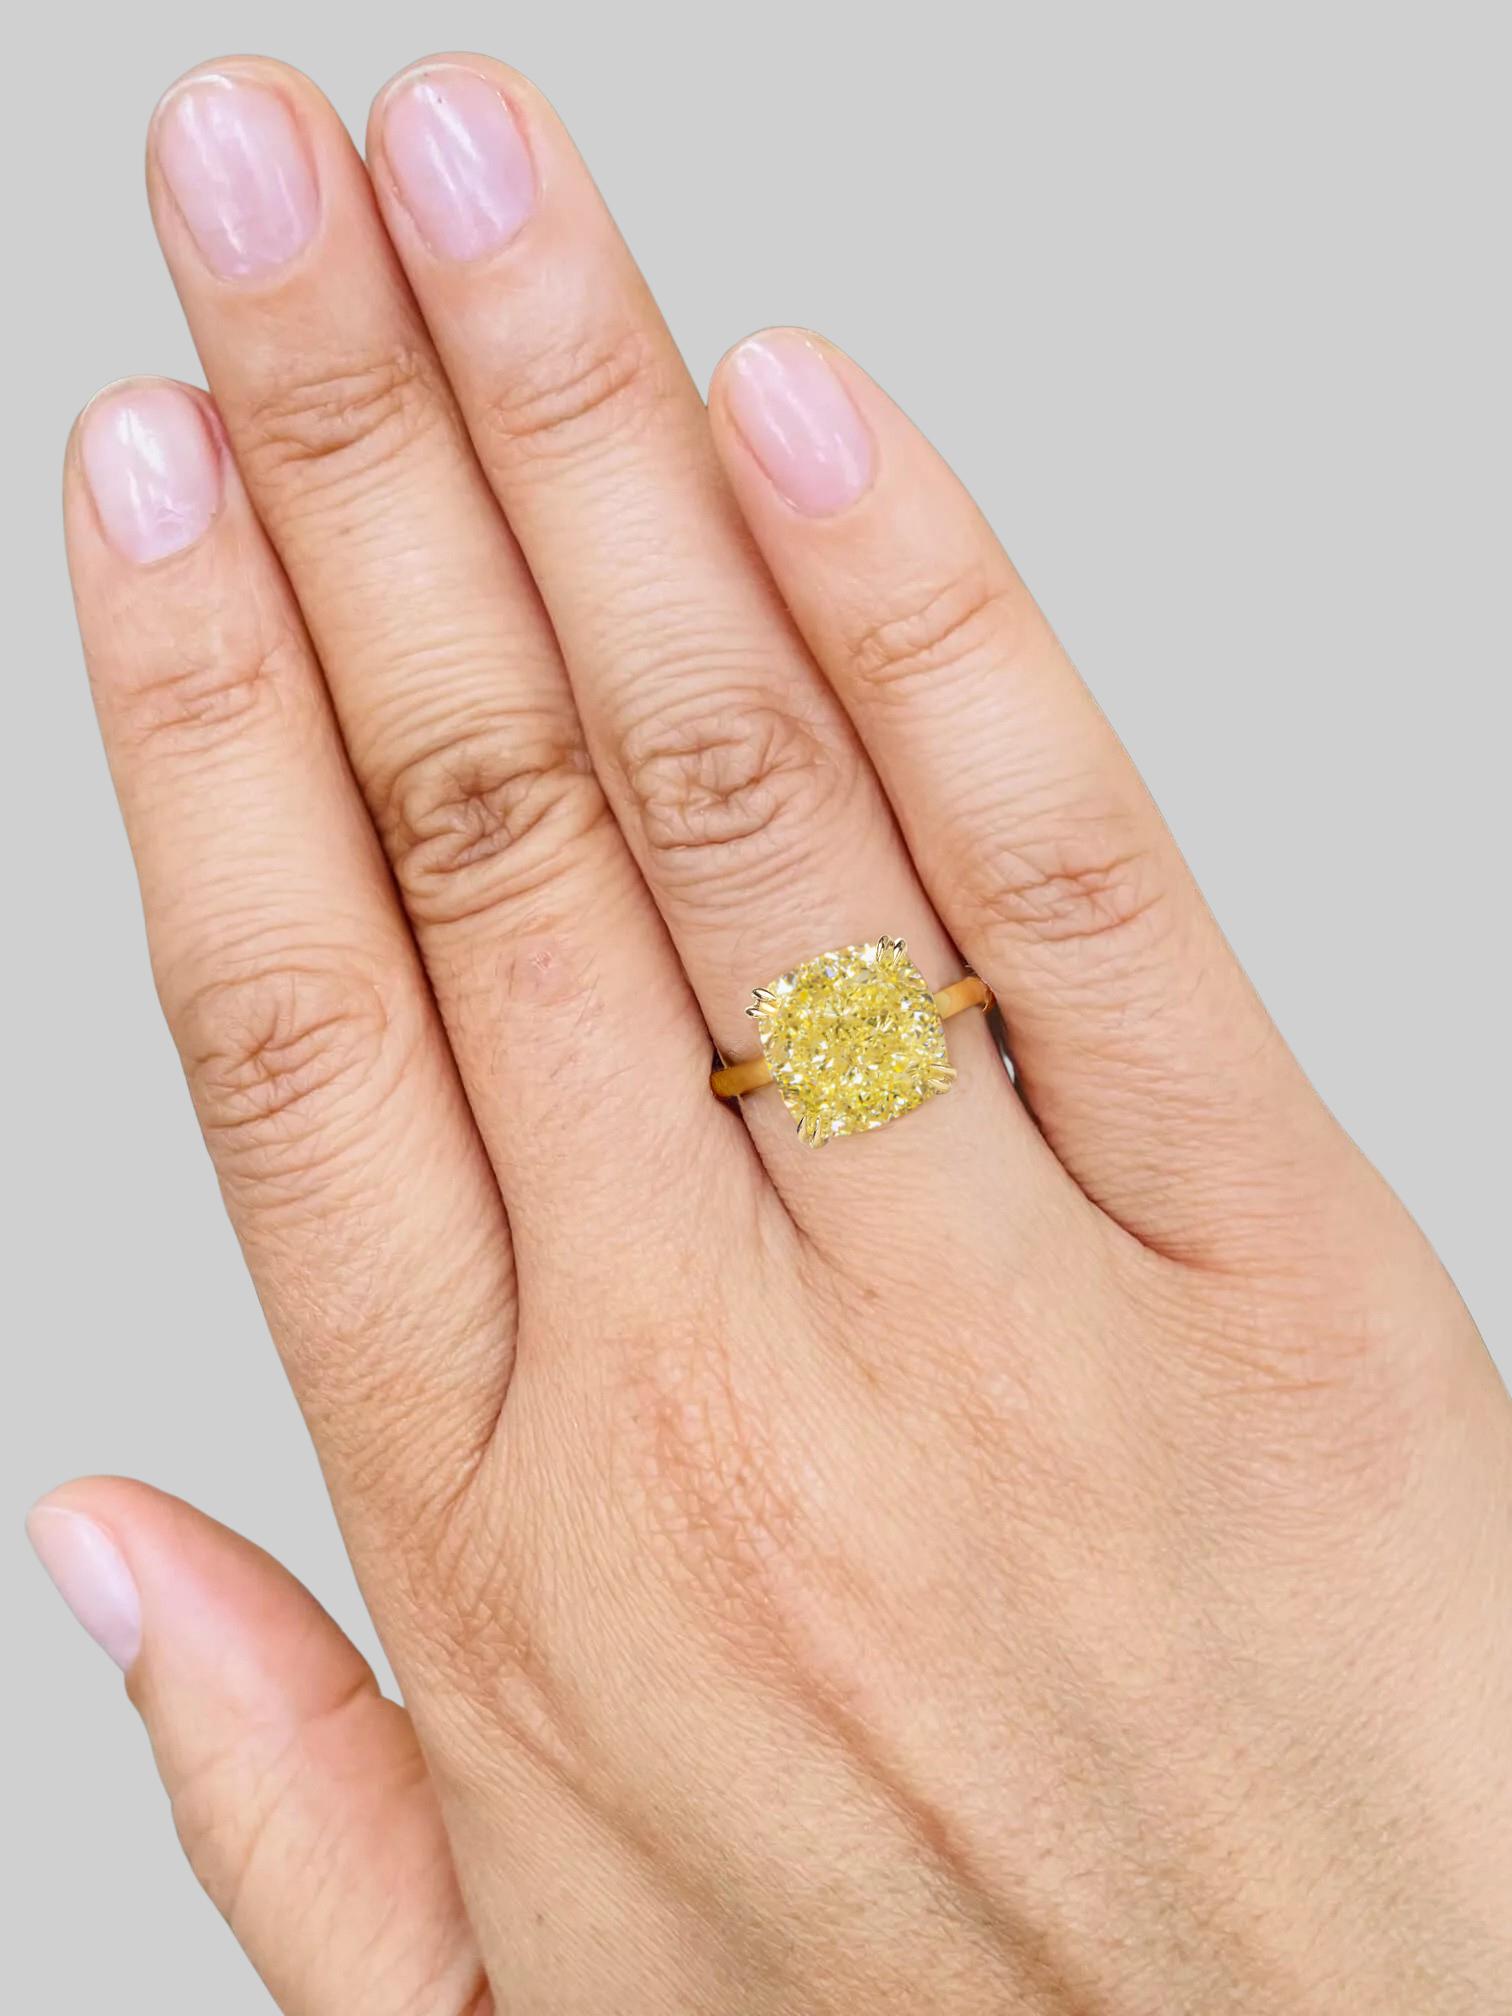 Exquisite 18K Yellow Gold Solitaire Ring Featuring a 8 Carat GIA Certified Fancy Yellow Cushion Diamond (VVS2) by Antinori Di Sanpietro

Immerse yourself in the opulent world of Antinori Di Sanpietro with our unparalleled solitaire ring, a symbol of